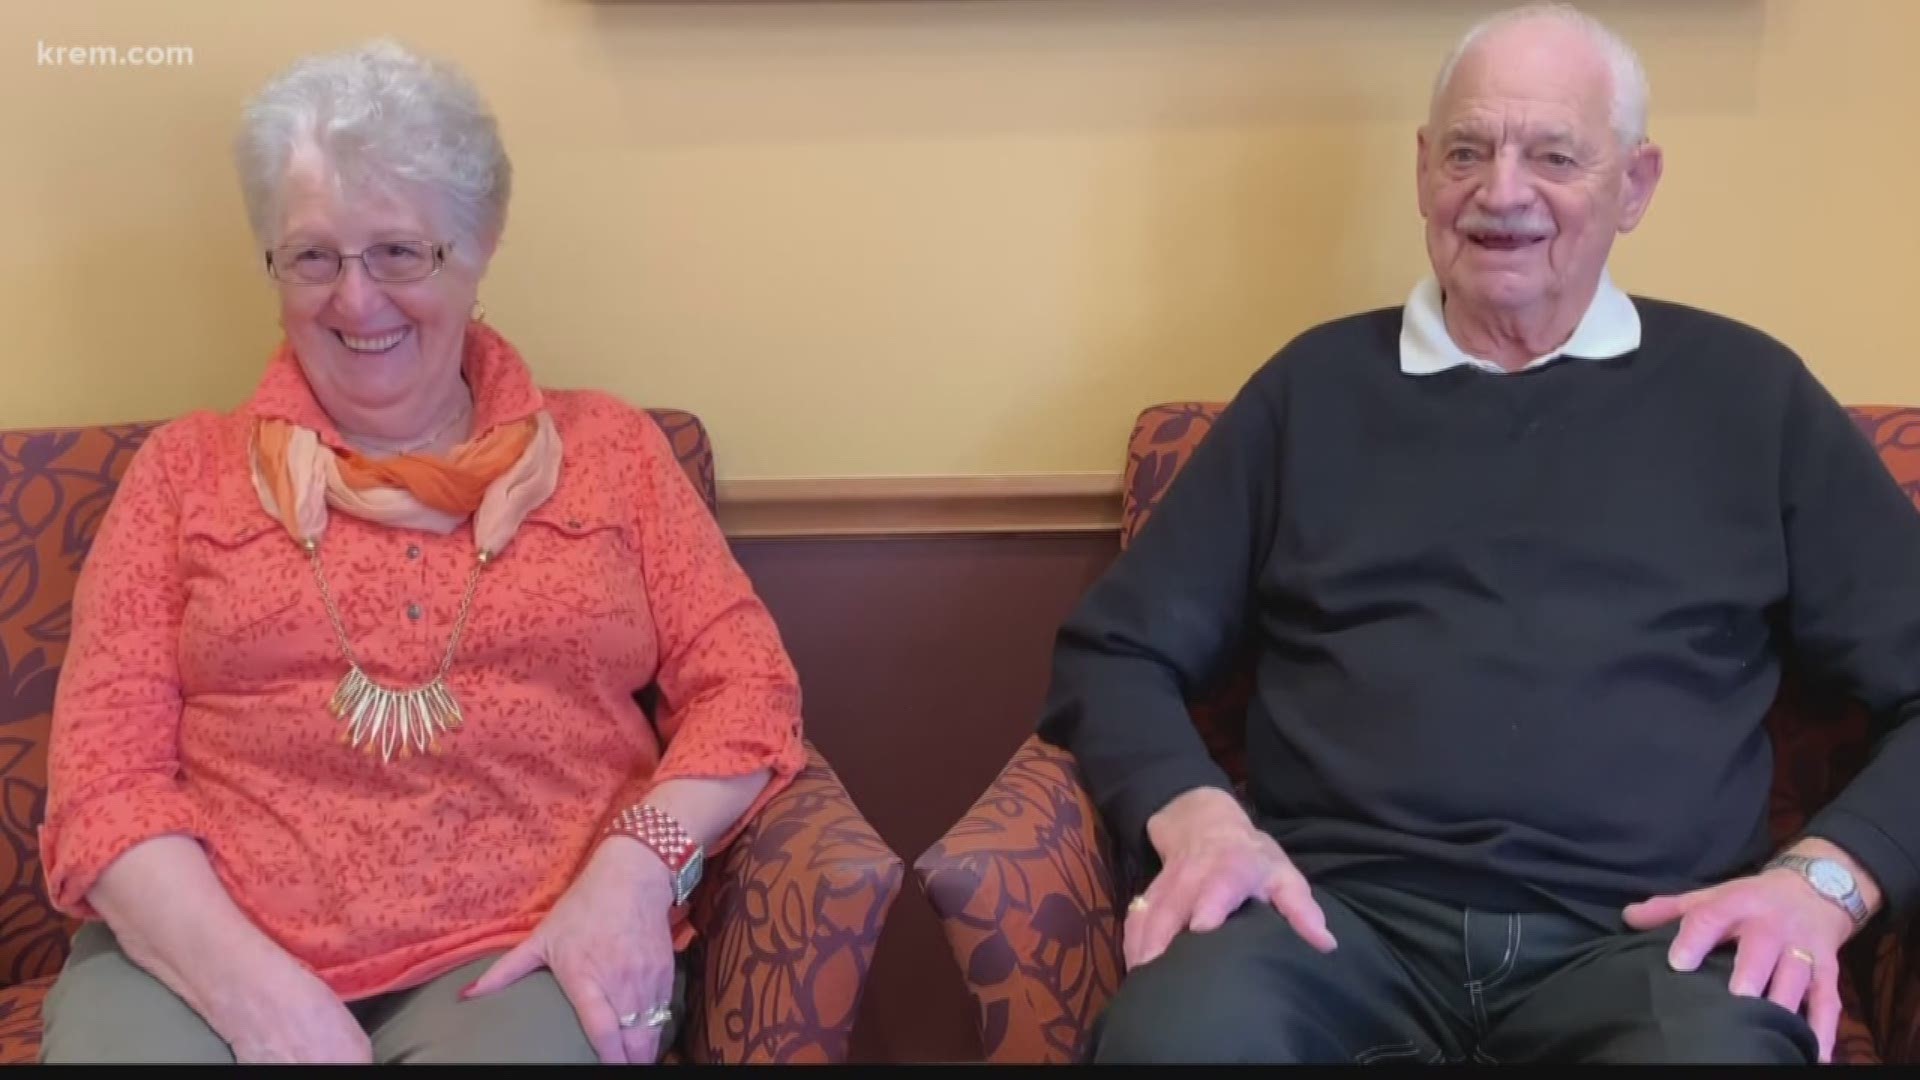 In honor of Valentine’s Day we’re sharing some of our favorite Spokane love stories. These couples all met long before online dating. From grade school to double dates downtown, these romances began more than 60 years ago.